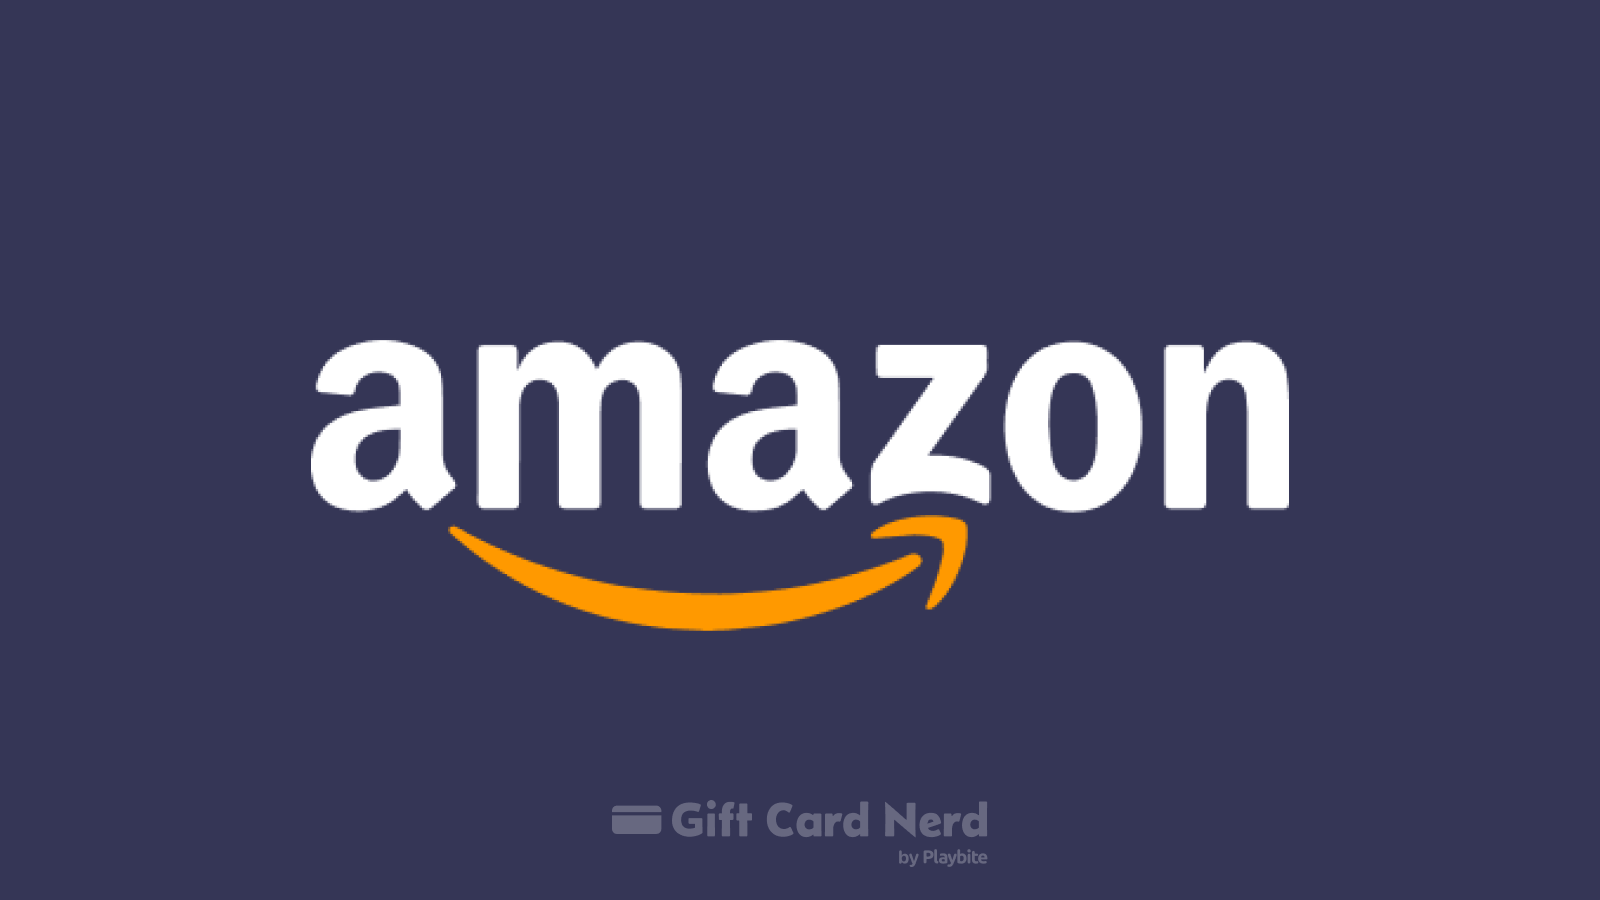 Can I Use an Amazon Gift Card on Google Play Store?